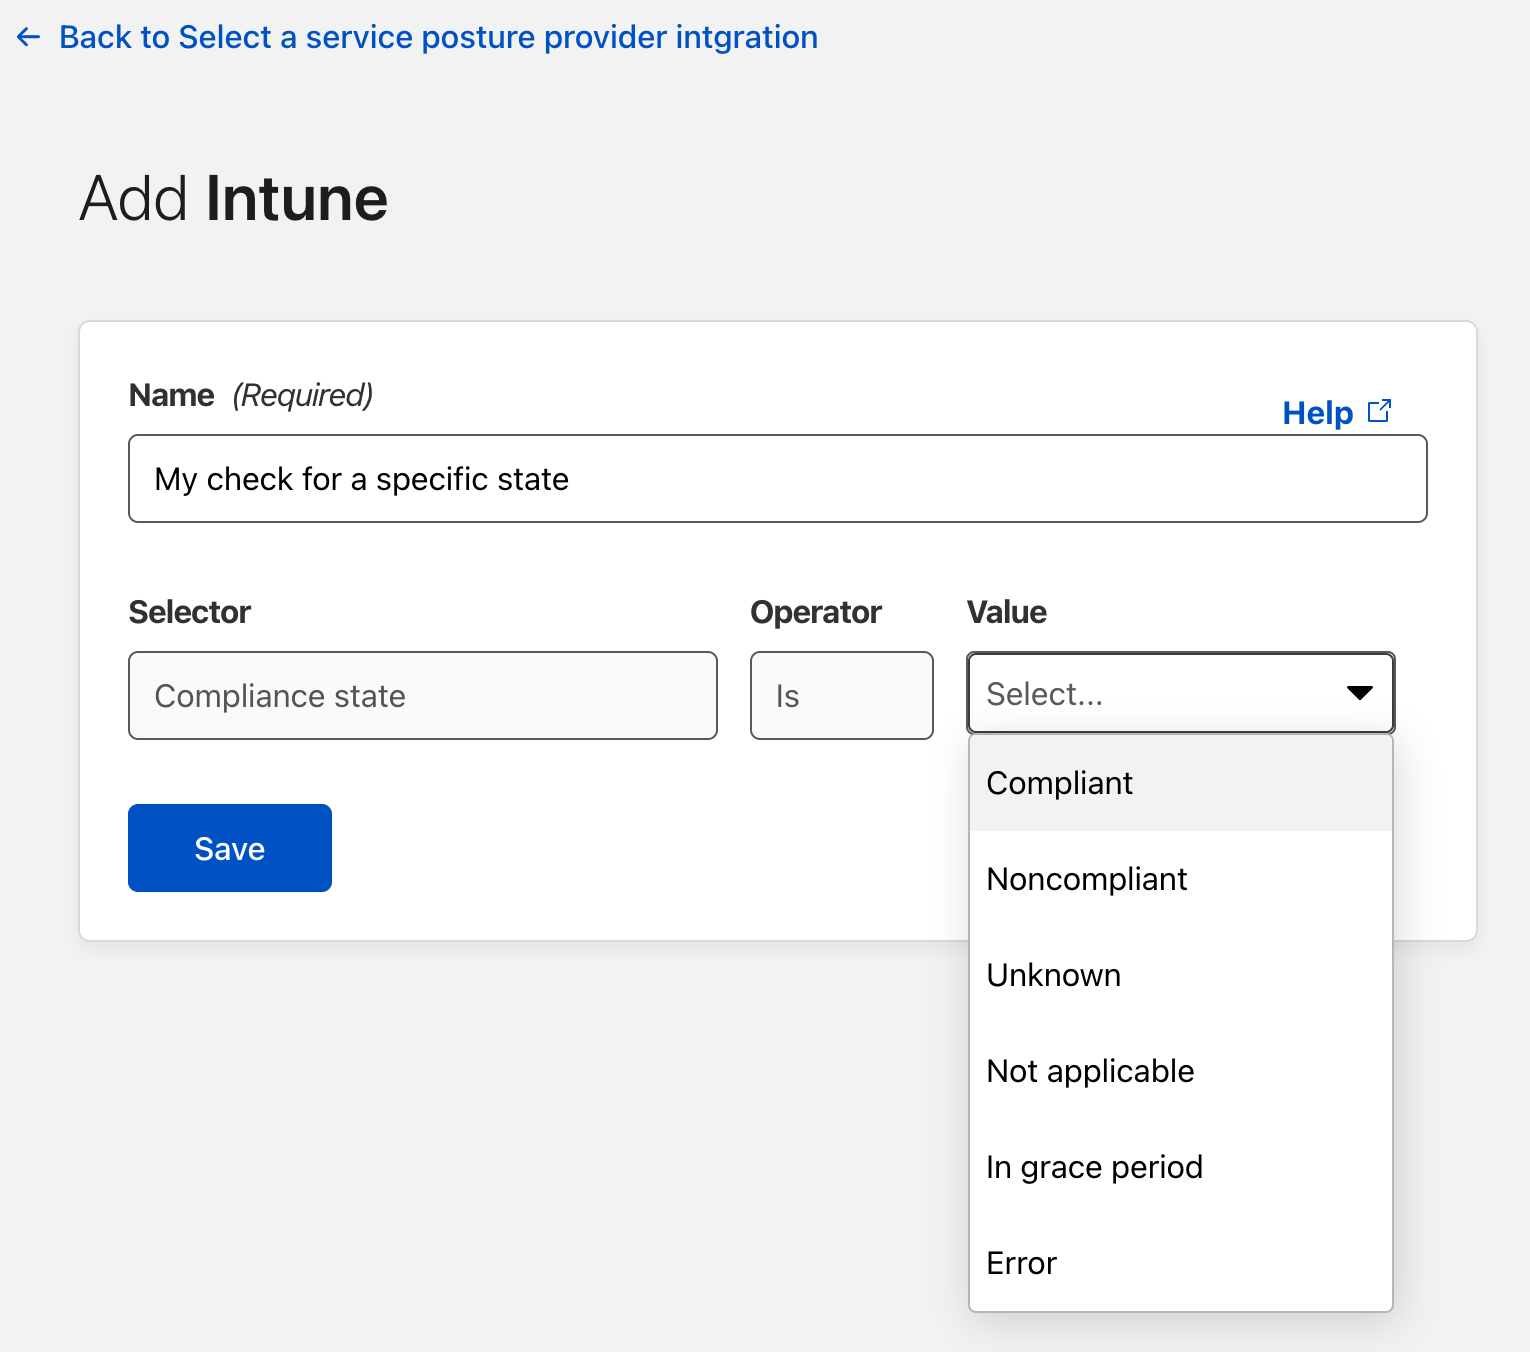 Cloudflare integrates with
Microsoft Intune to give CISOs
secure control across devices,
applications, and corporate networks